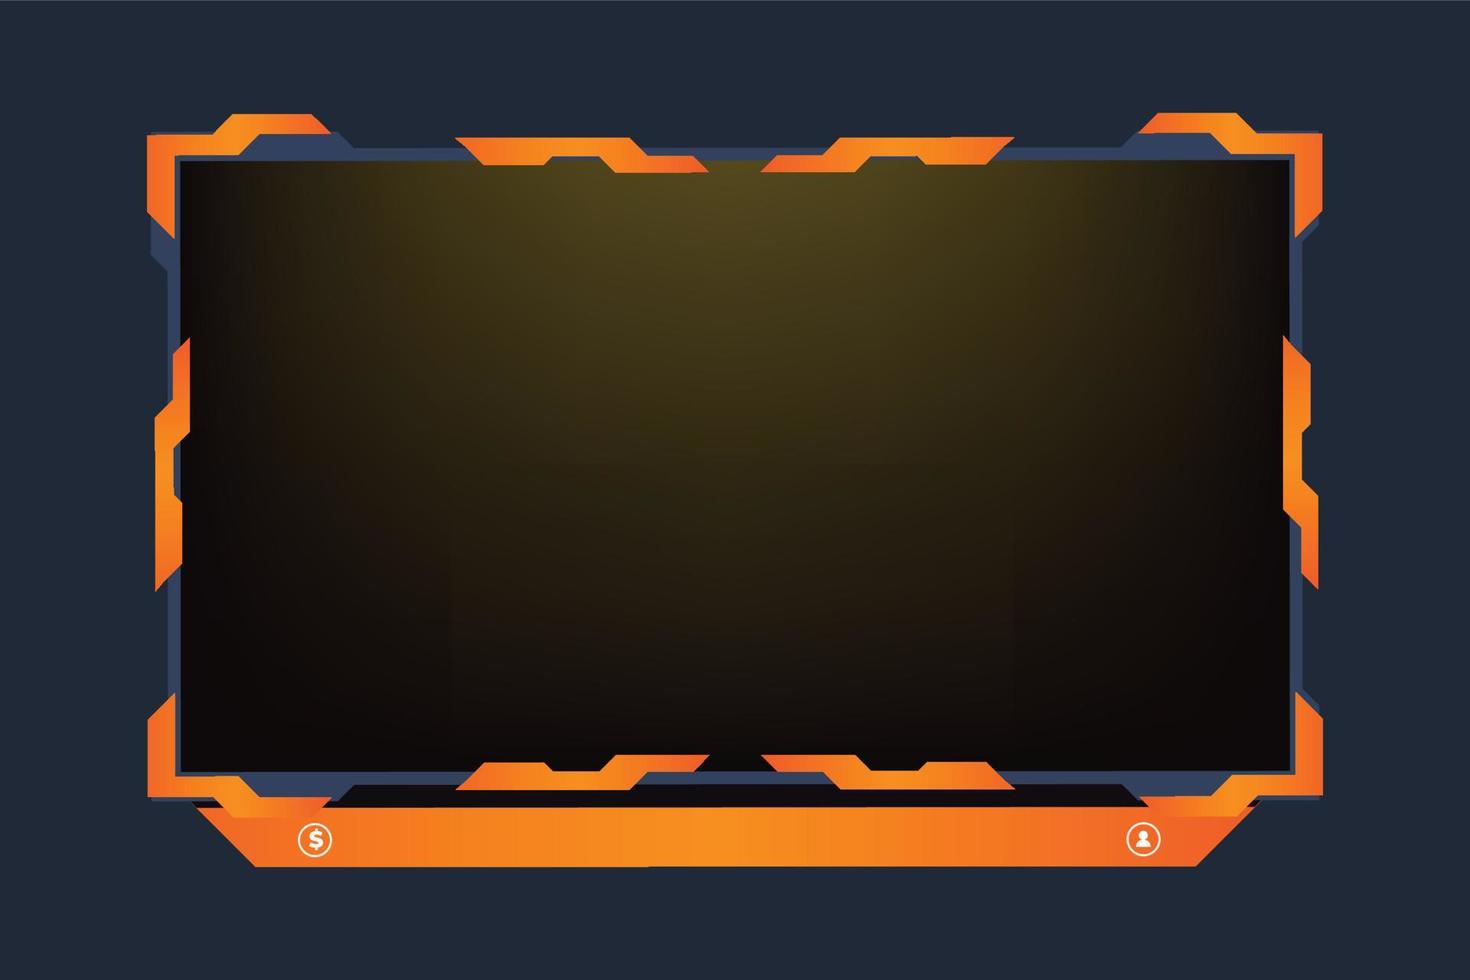 Gaming screen panel decoration with fire color and modern shapes. Metallic live streaming overlay decoration for online gamers. Streaming broadcast info layout vector with buttons.